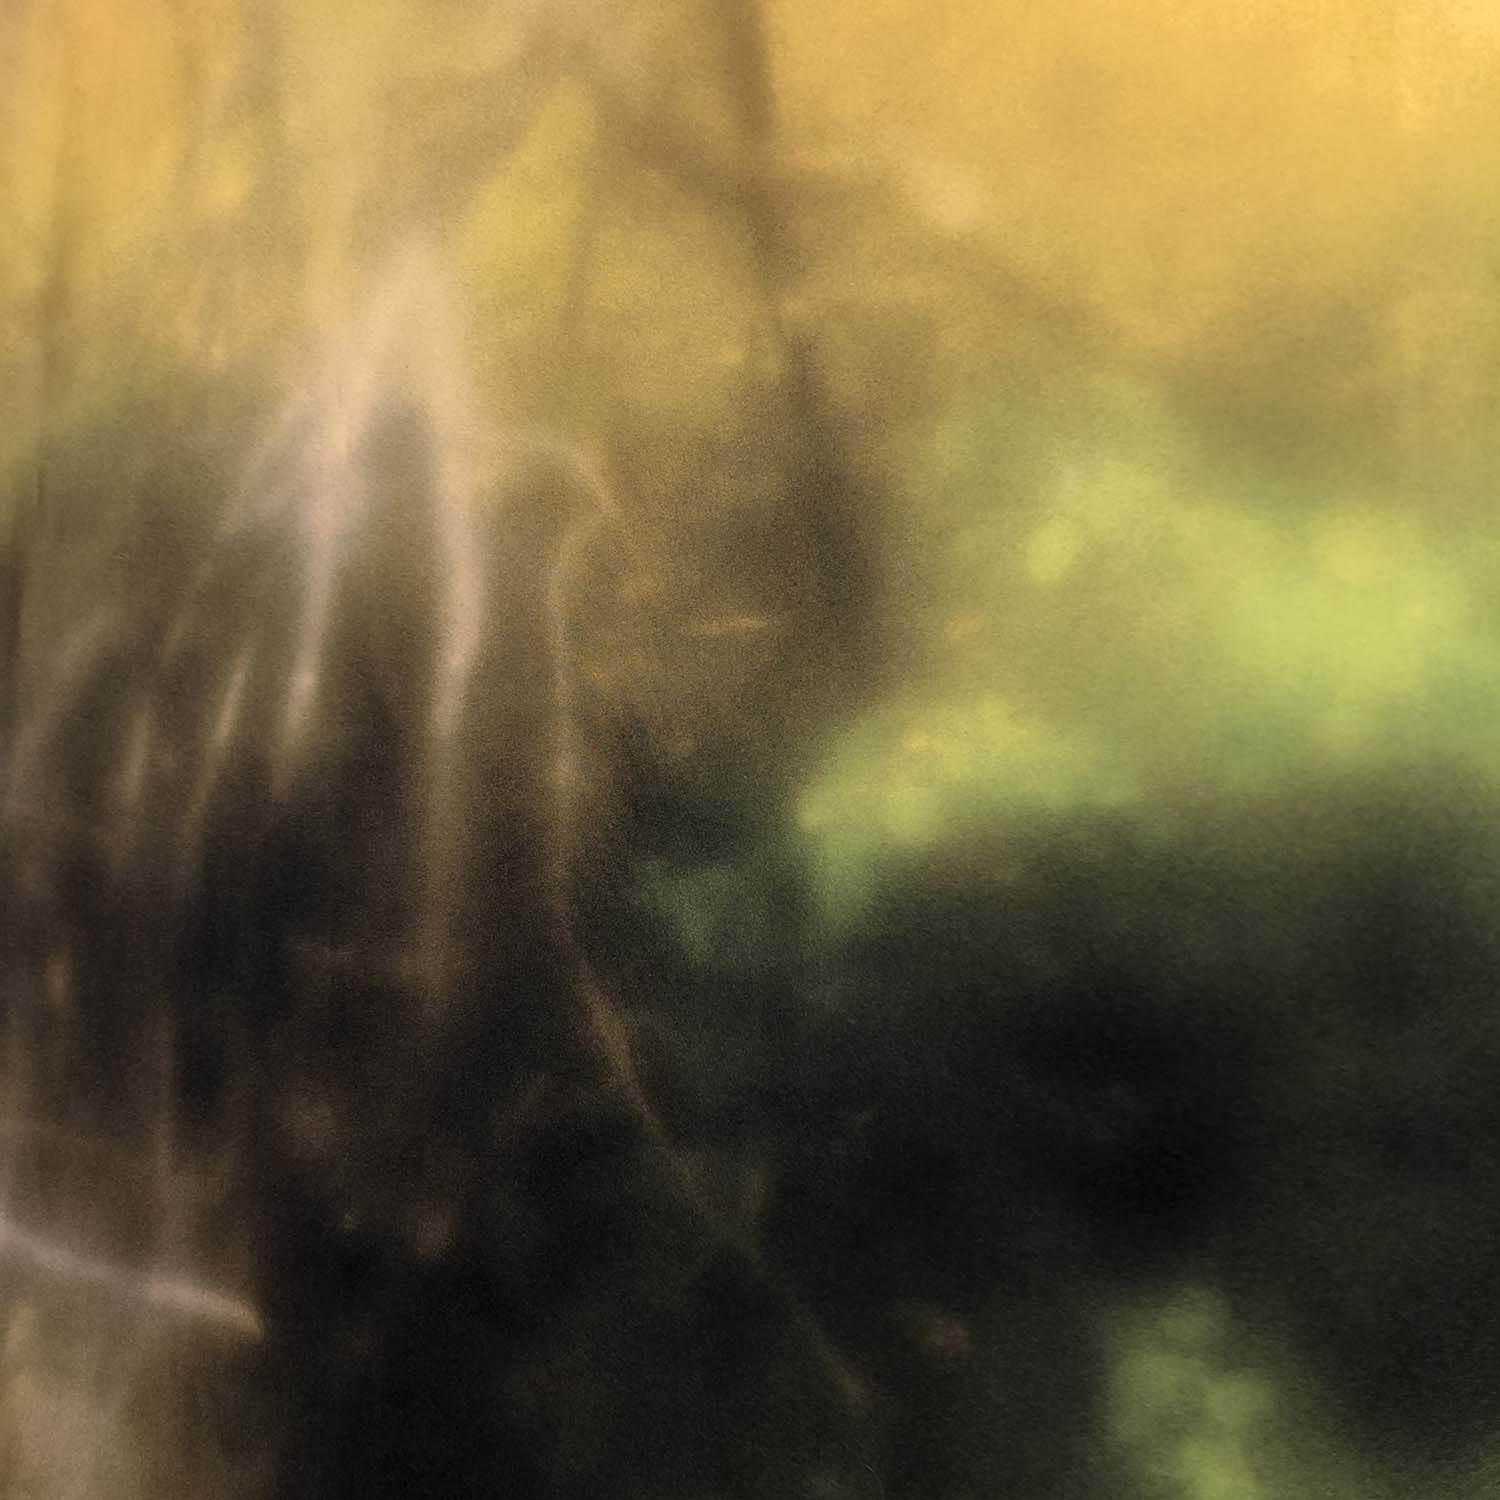 blurred elements from nature in yellow, green and brown